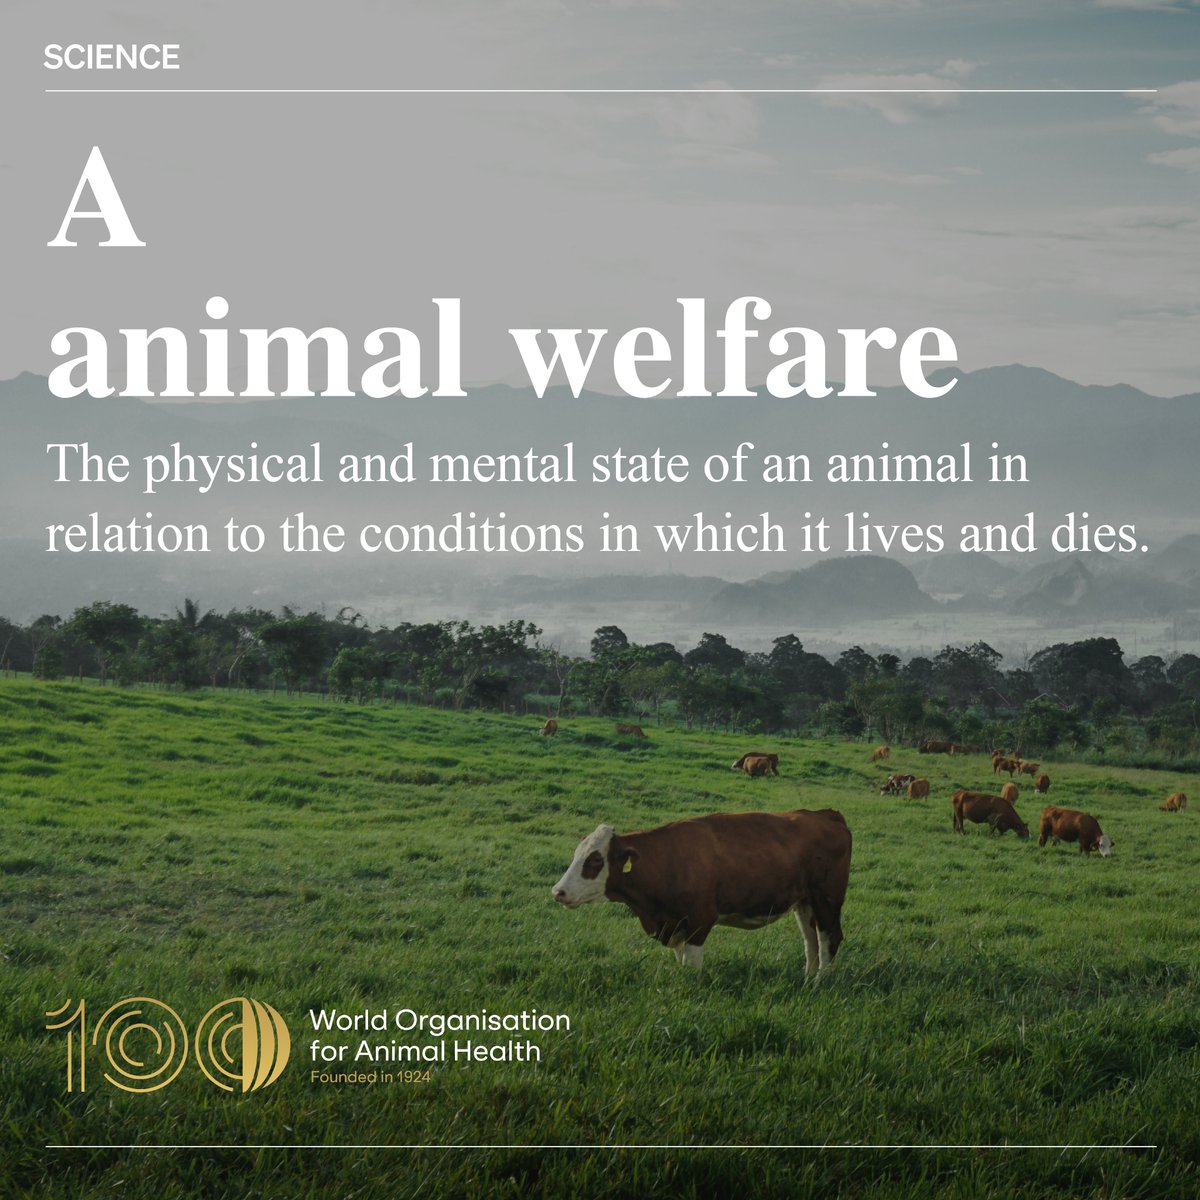 Today, from the animal health dictionary: animal welfare. We are working towards a world where the welfare of animals is respected, promoted and advanced, in ways that complements animal health, human well-being, socio-economic development and environmental sustainability.